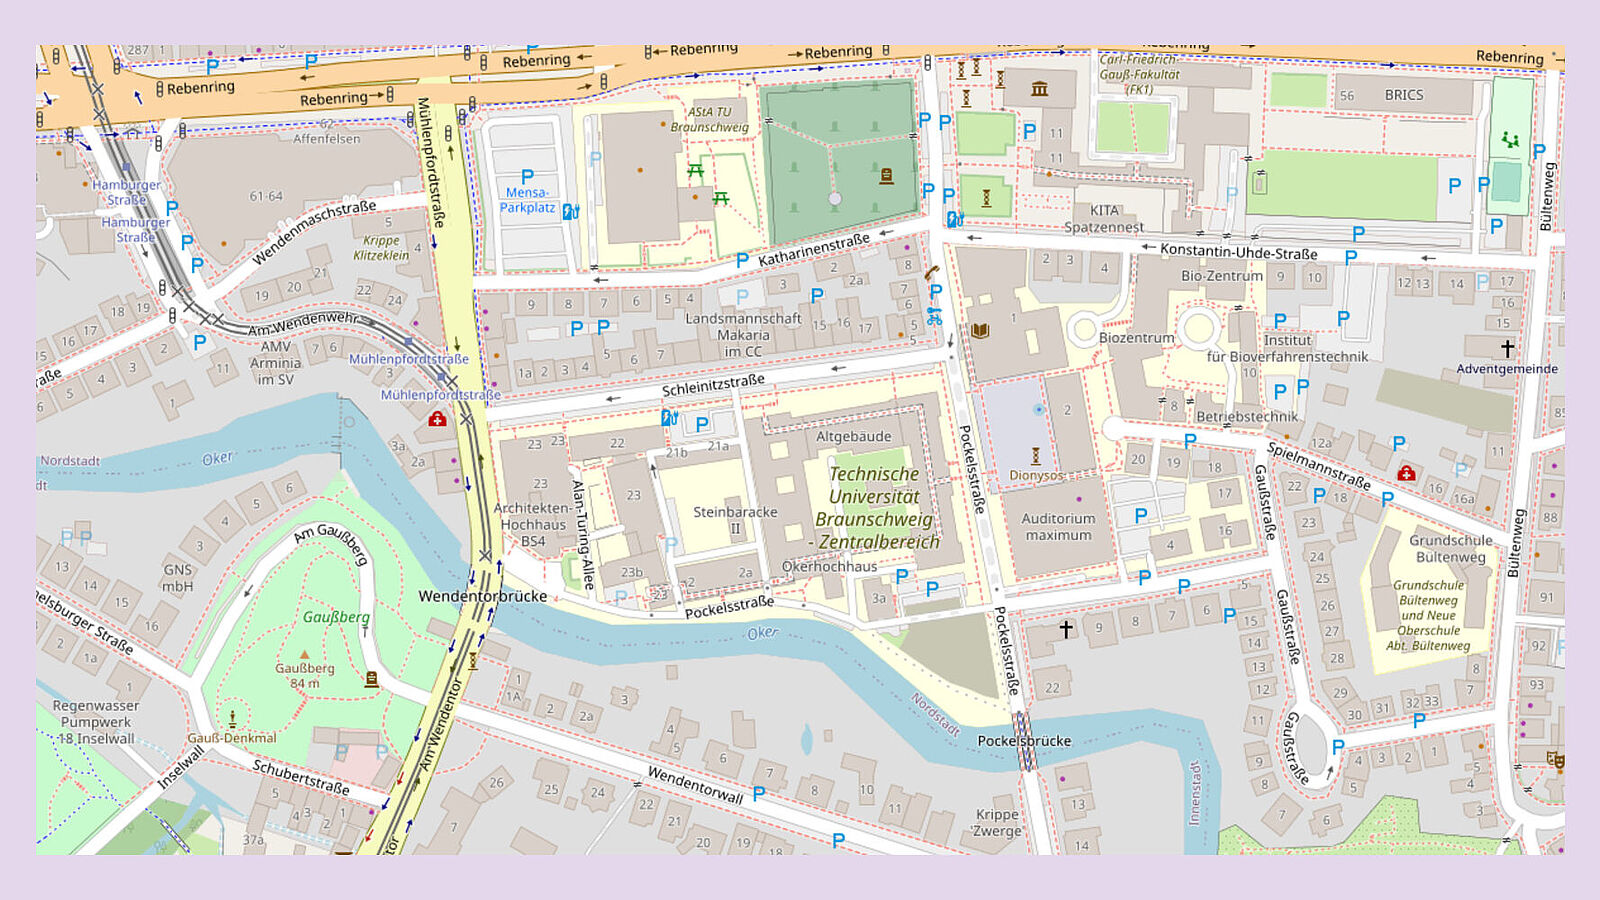 Map of Braunschweig preview image for Open Street Map